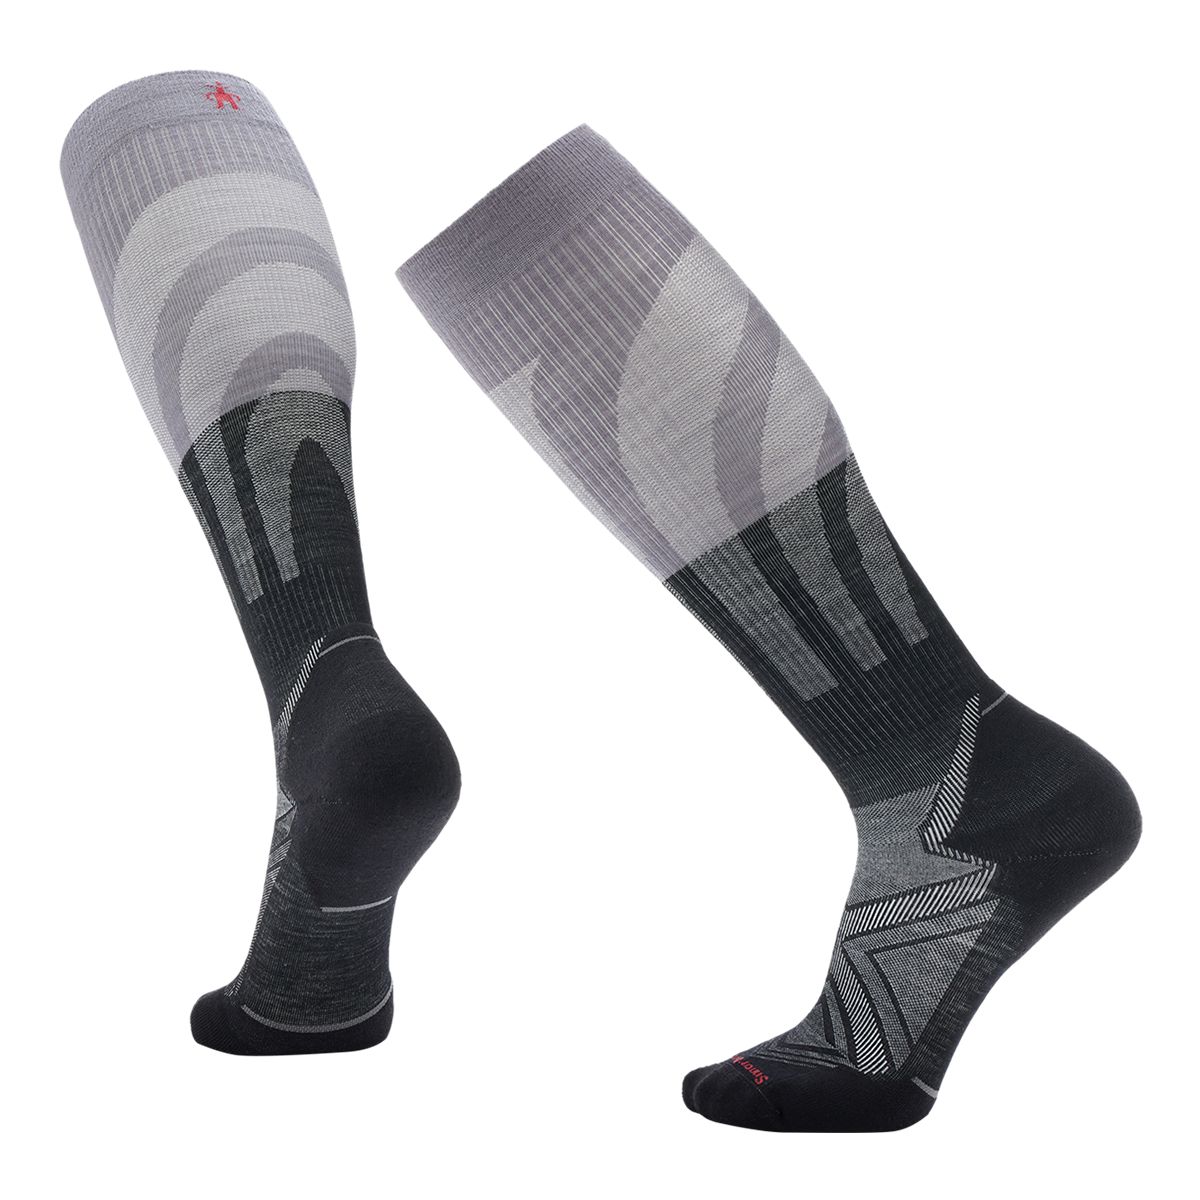 Image of Smartwool Men's Run Target Cushion Compression Over The Calf Socks